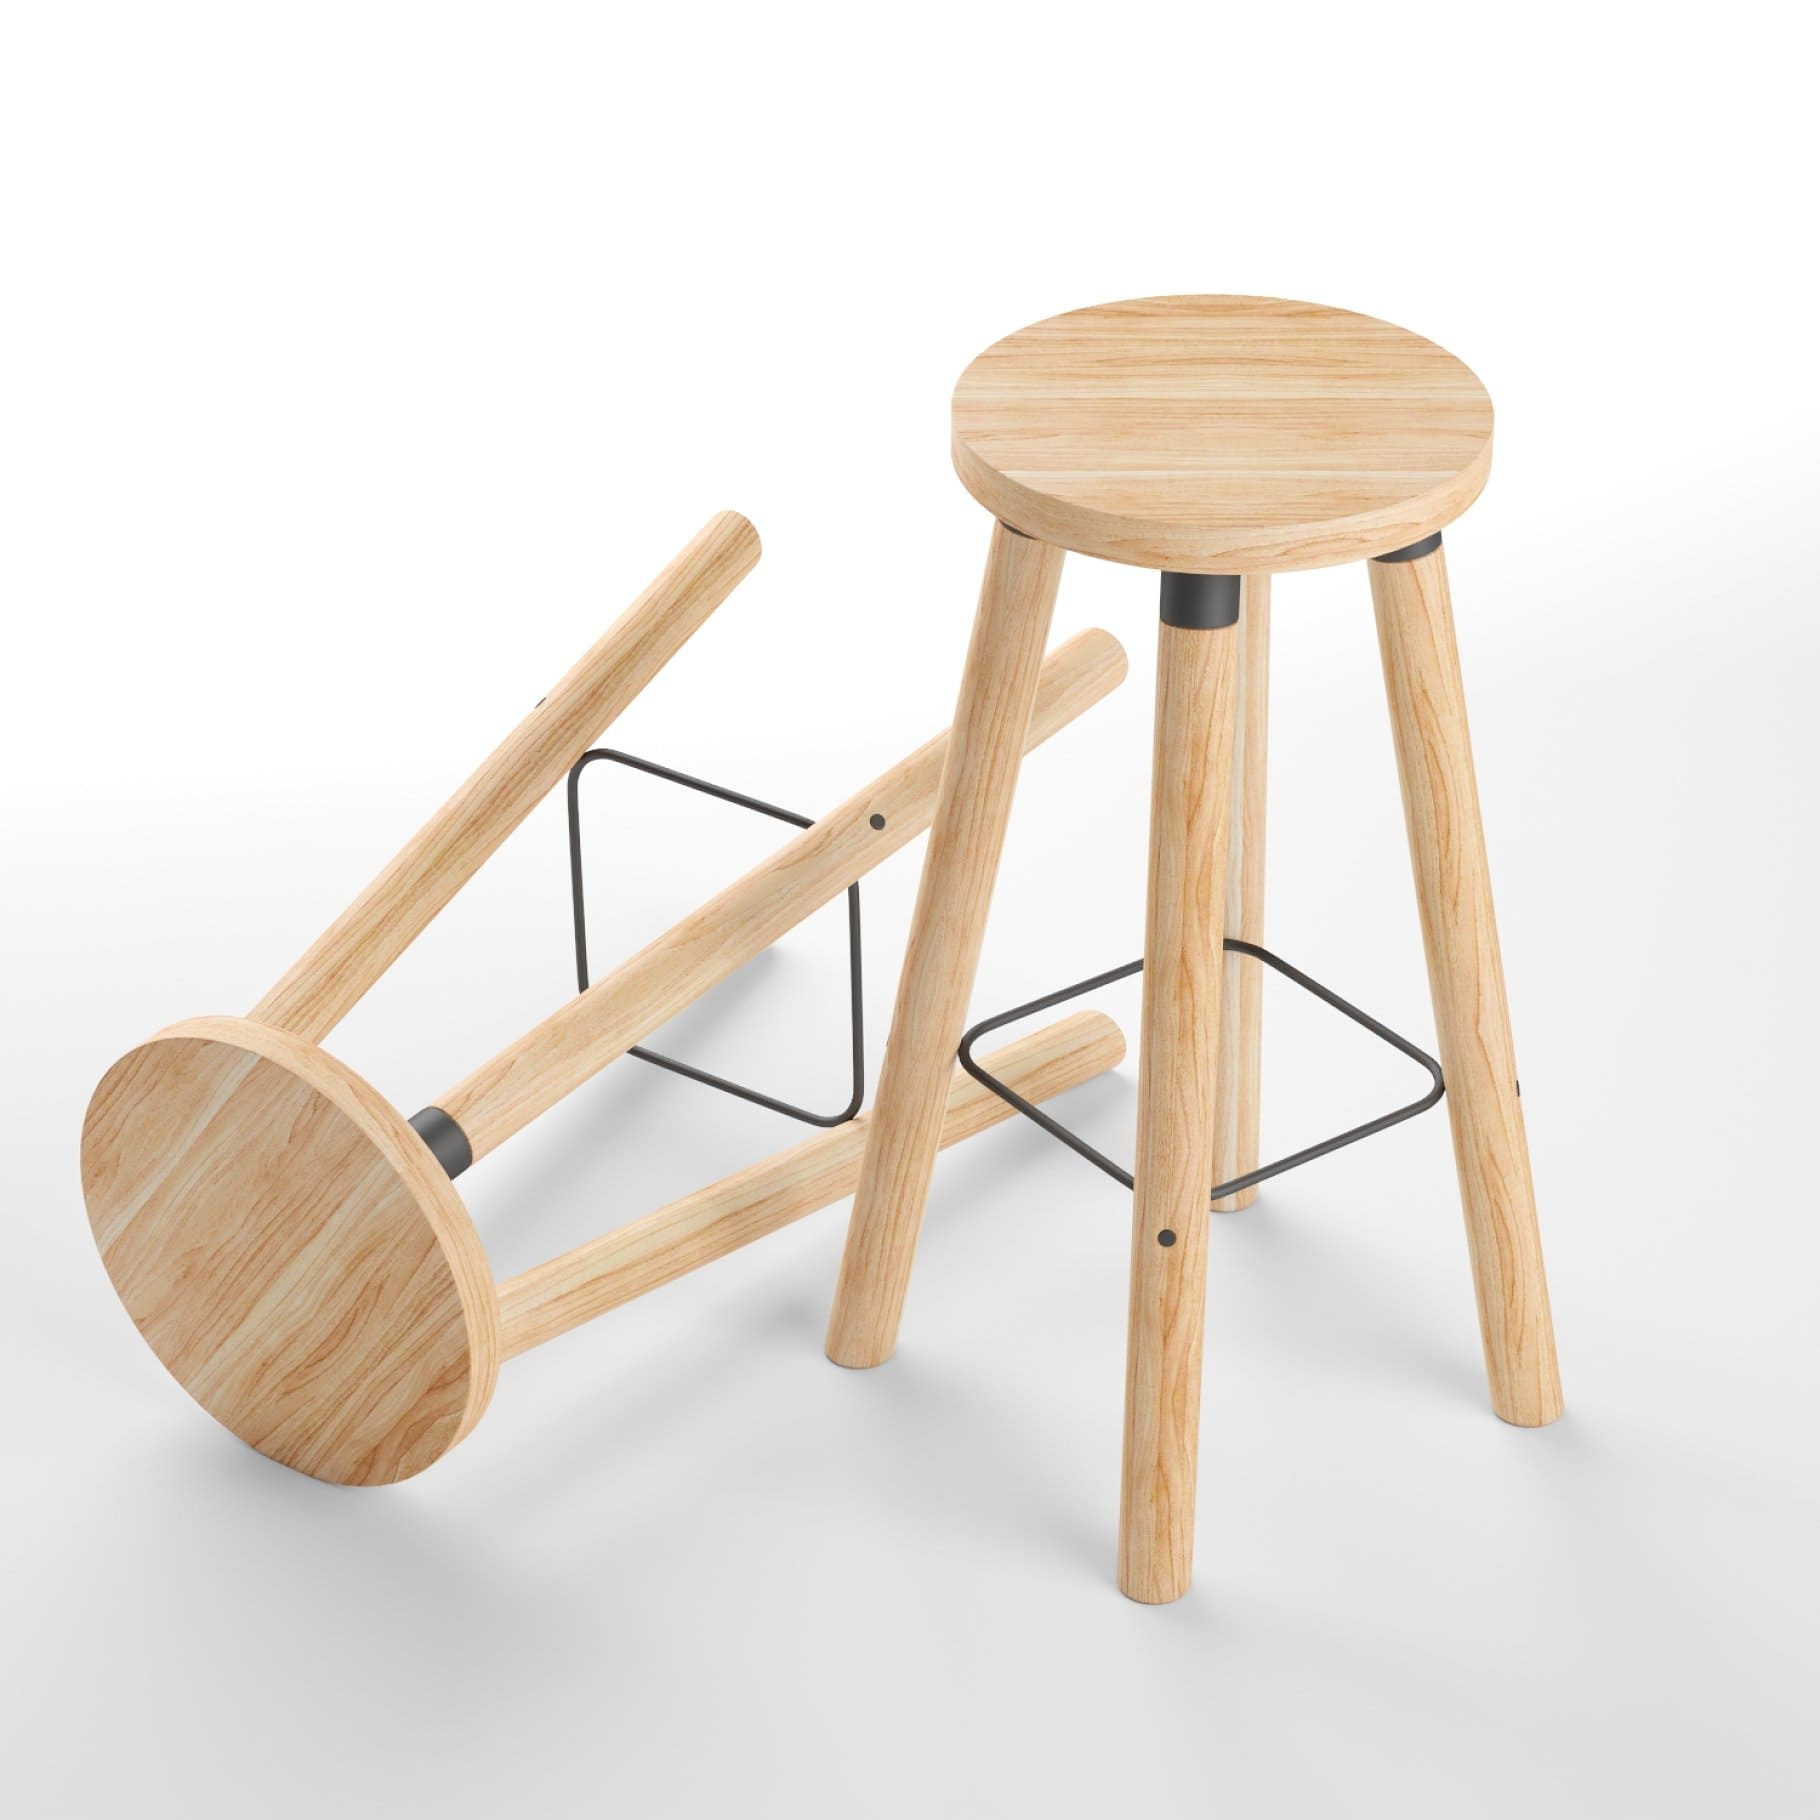 A metal square joins the four wooden legs of the Partridge Bar Stool Design By Them.